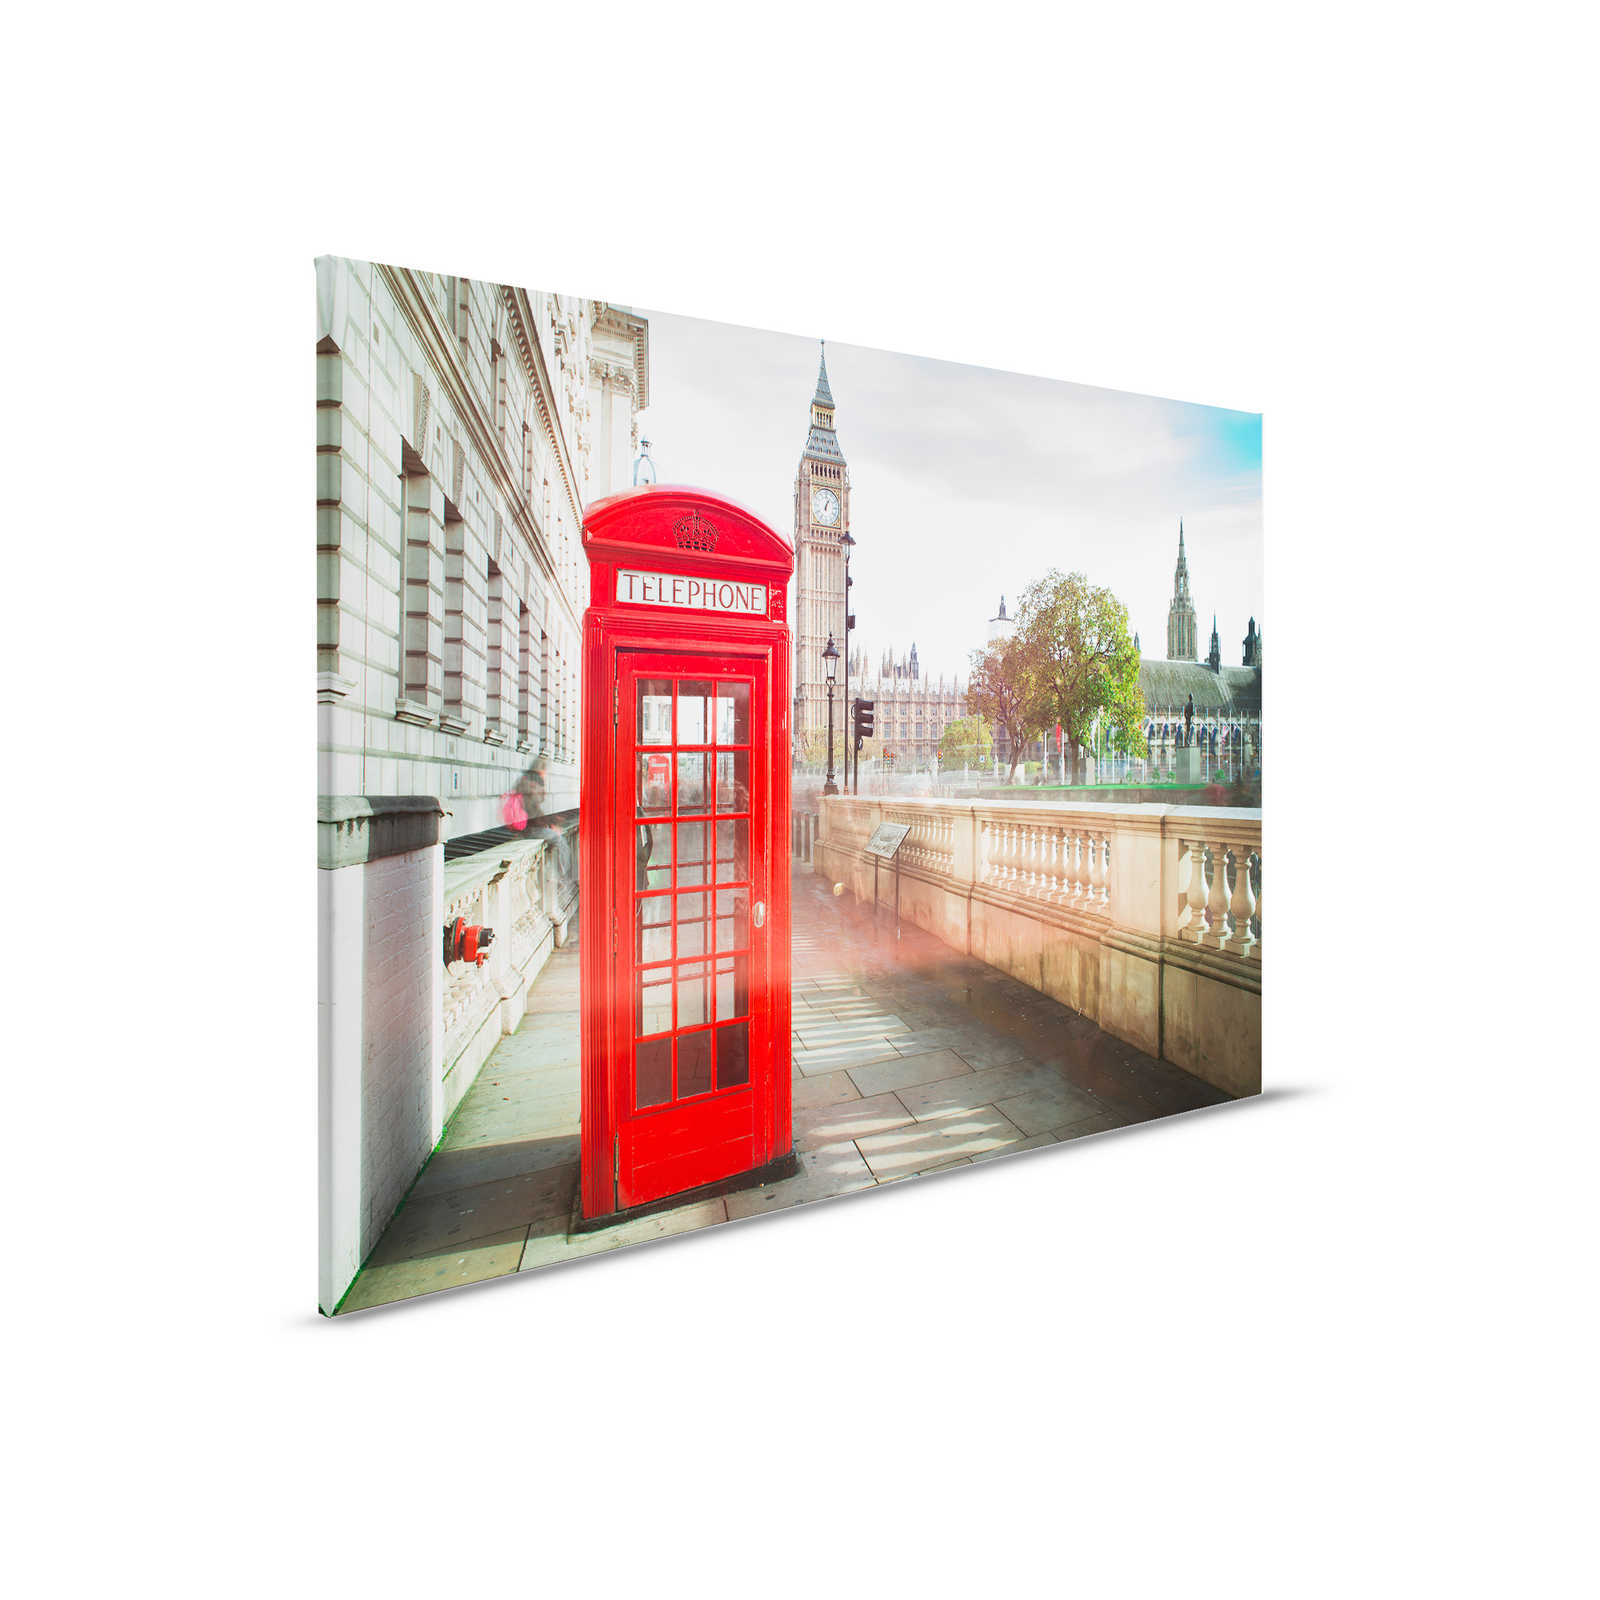         Leinwand mit roter Telefonzelle in London – 0,90 m x 0,60 m
    